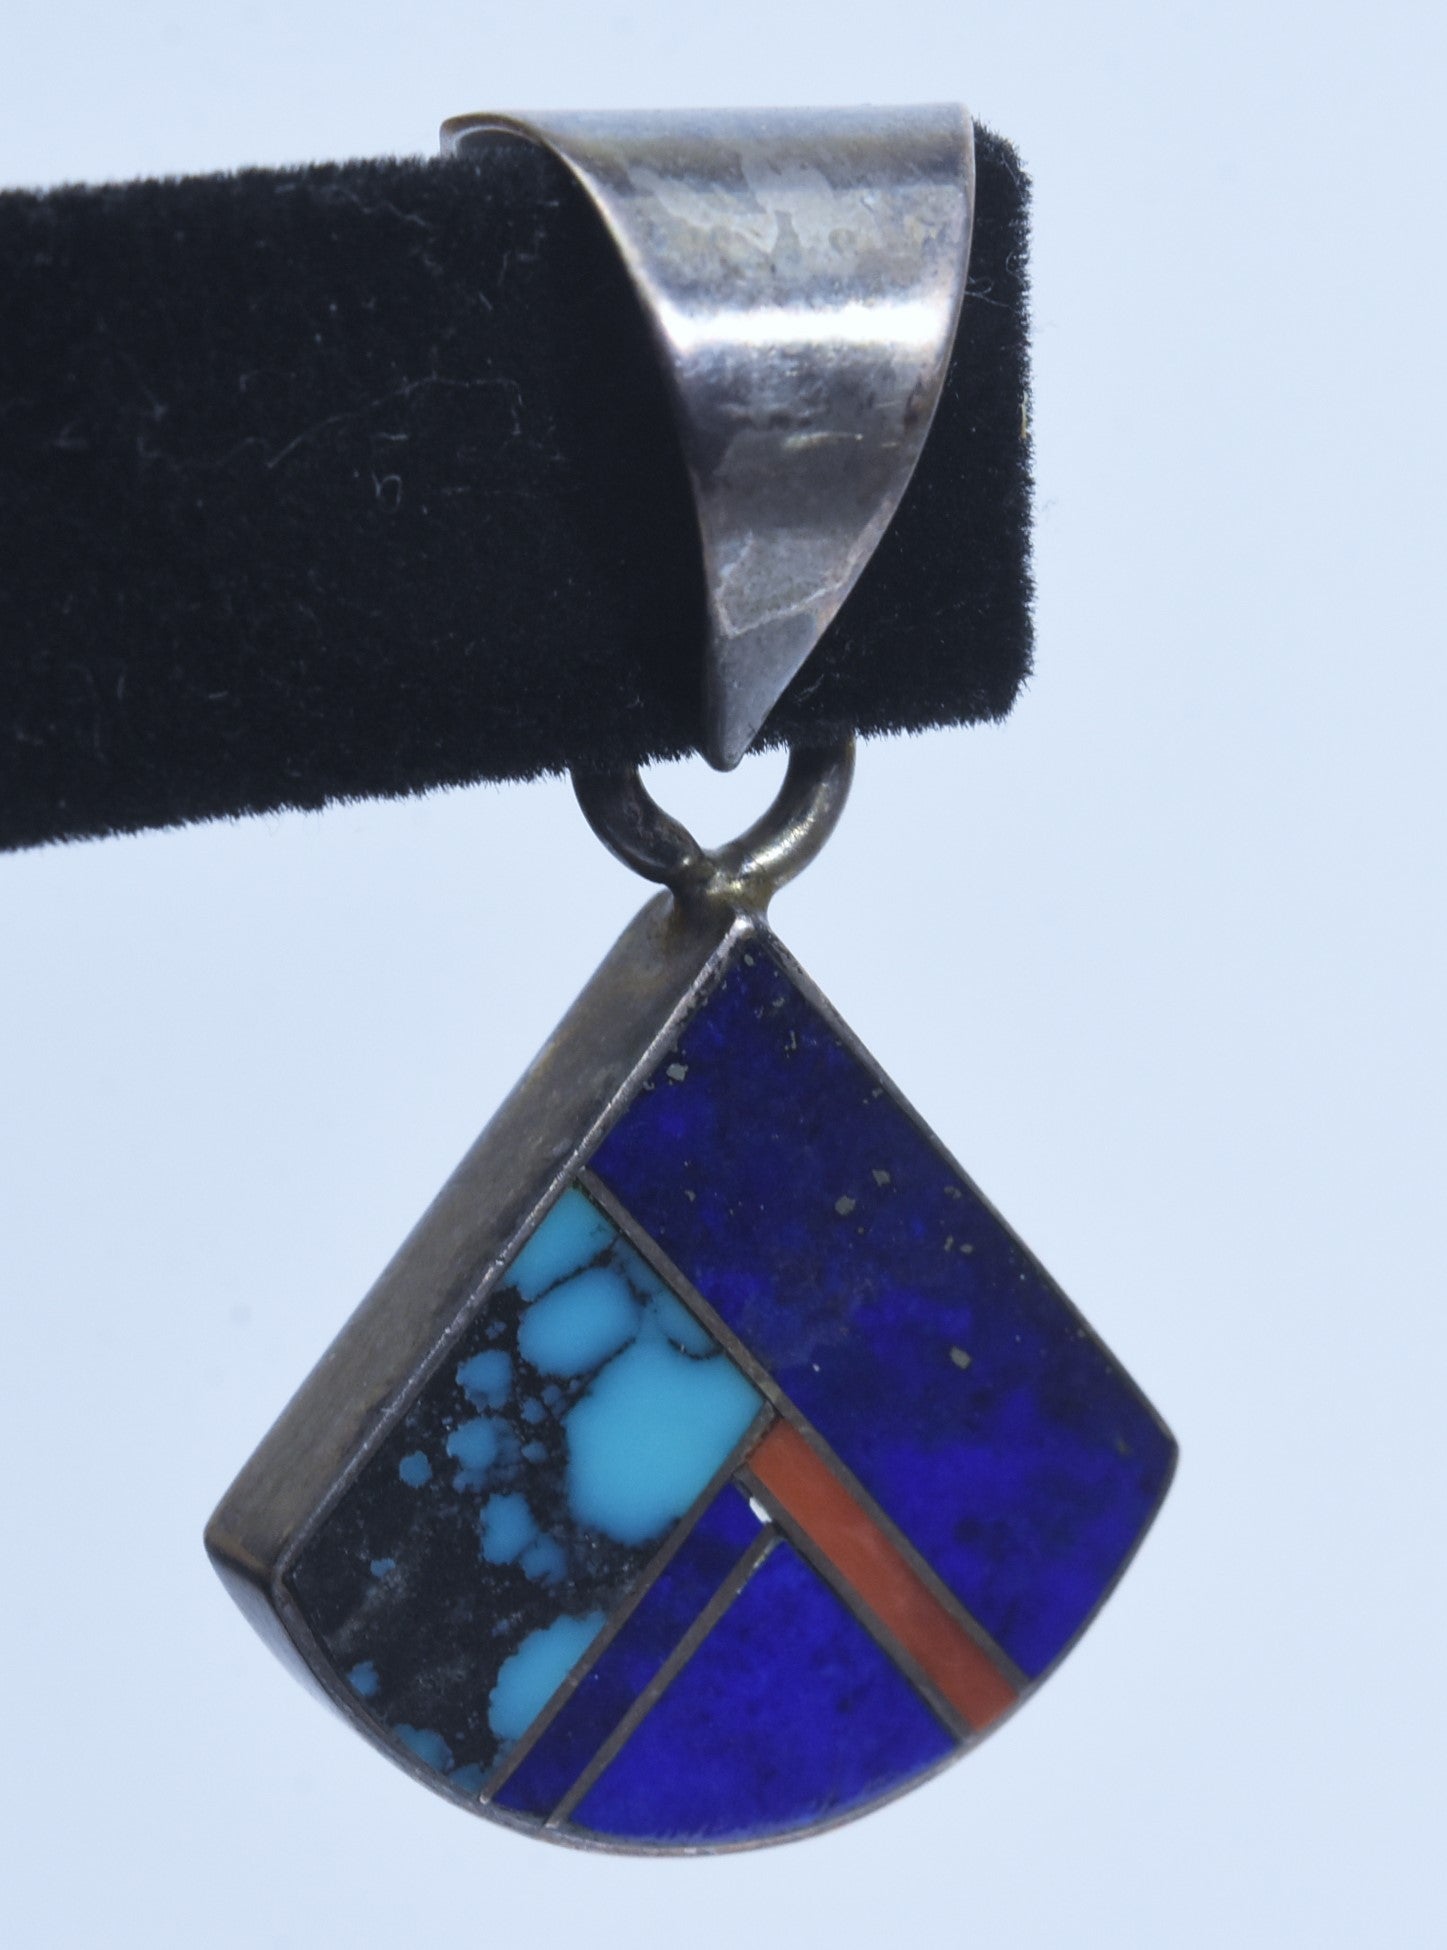 Turquoise, Lapis Lazuli, Coral Sterling Silver Inlaid Pendant